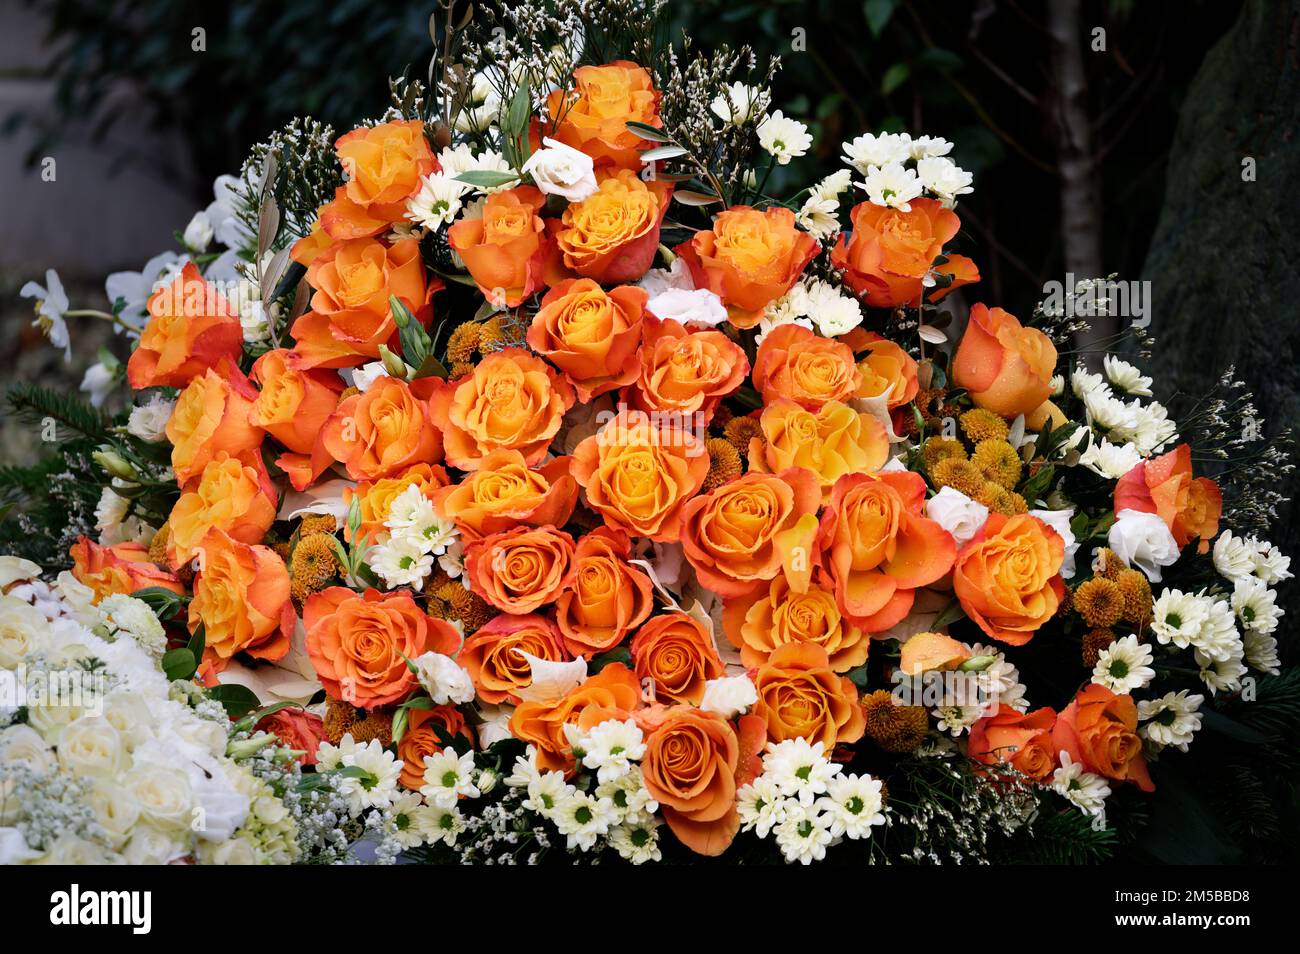 a large bouquet of orang colored roses on a grave after a funeral Stock Photo